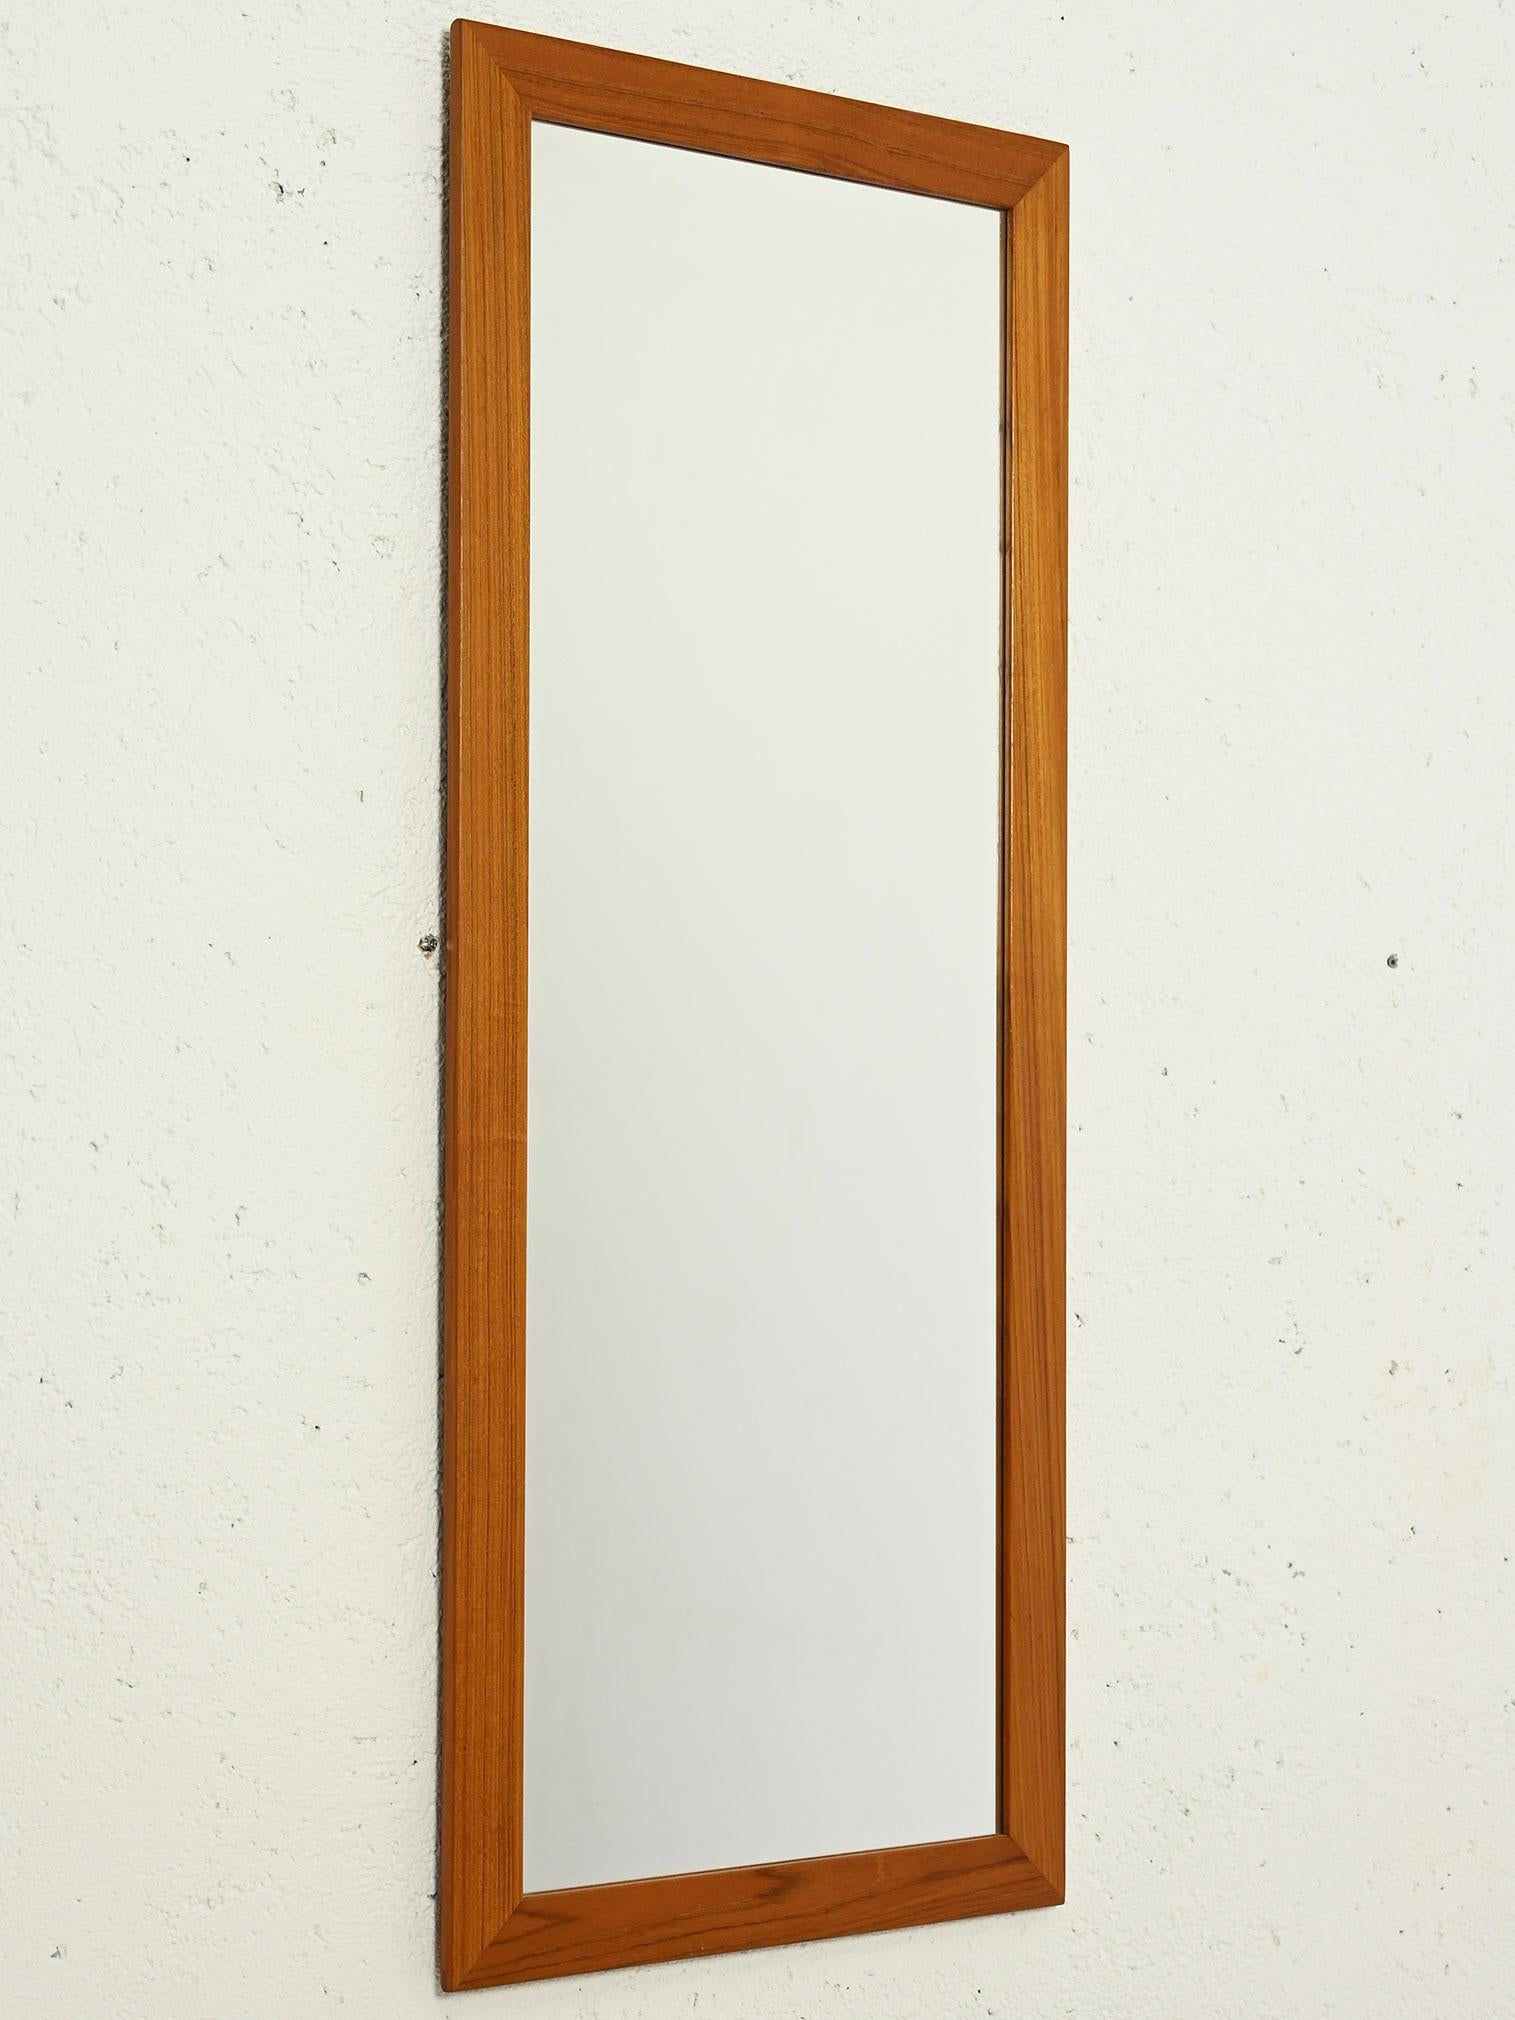 Large vintage rectangular teak mirror with thick frame, made in Scandinavia in the 1950s/60s. 

The elegant Scandinavian craftsmanship is reflected in the clean, minimal lines. 

The warm teak color adds a vintage touch. 

Good condition. Mirror may